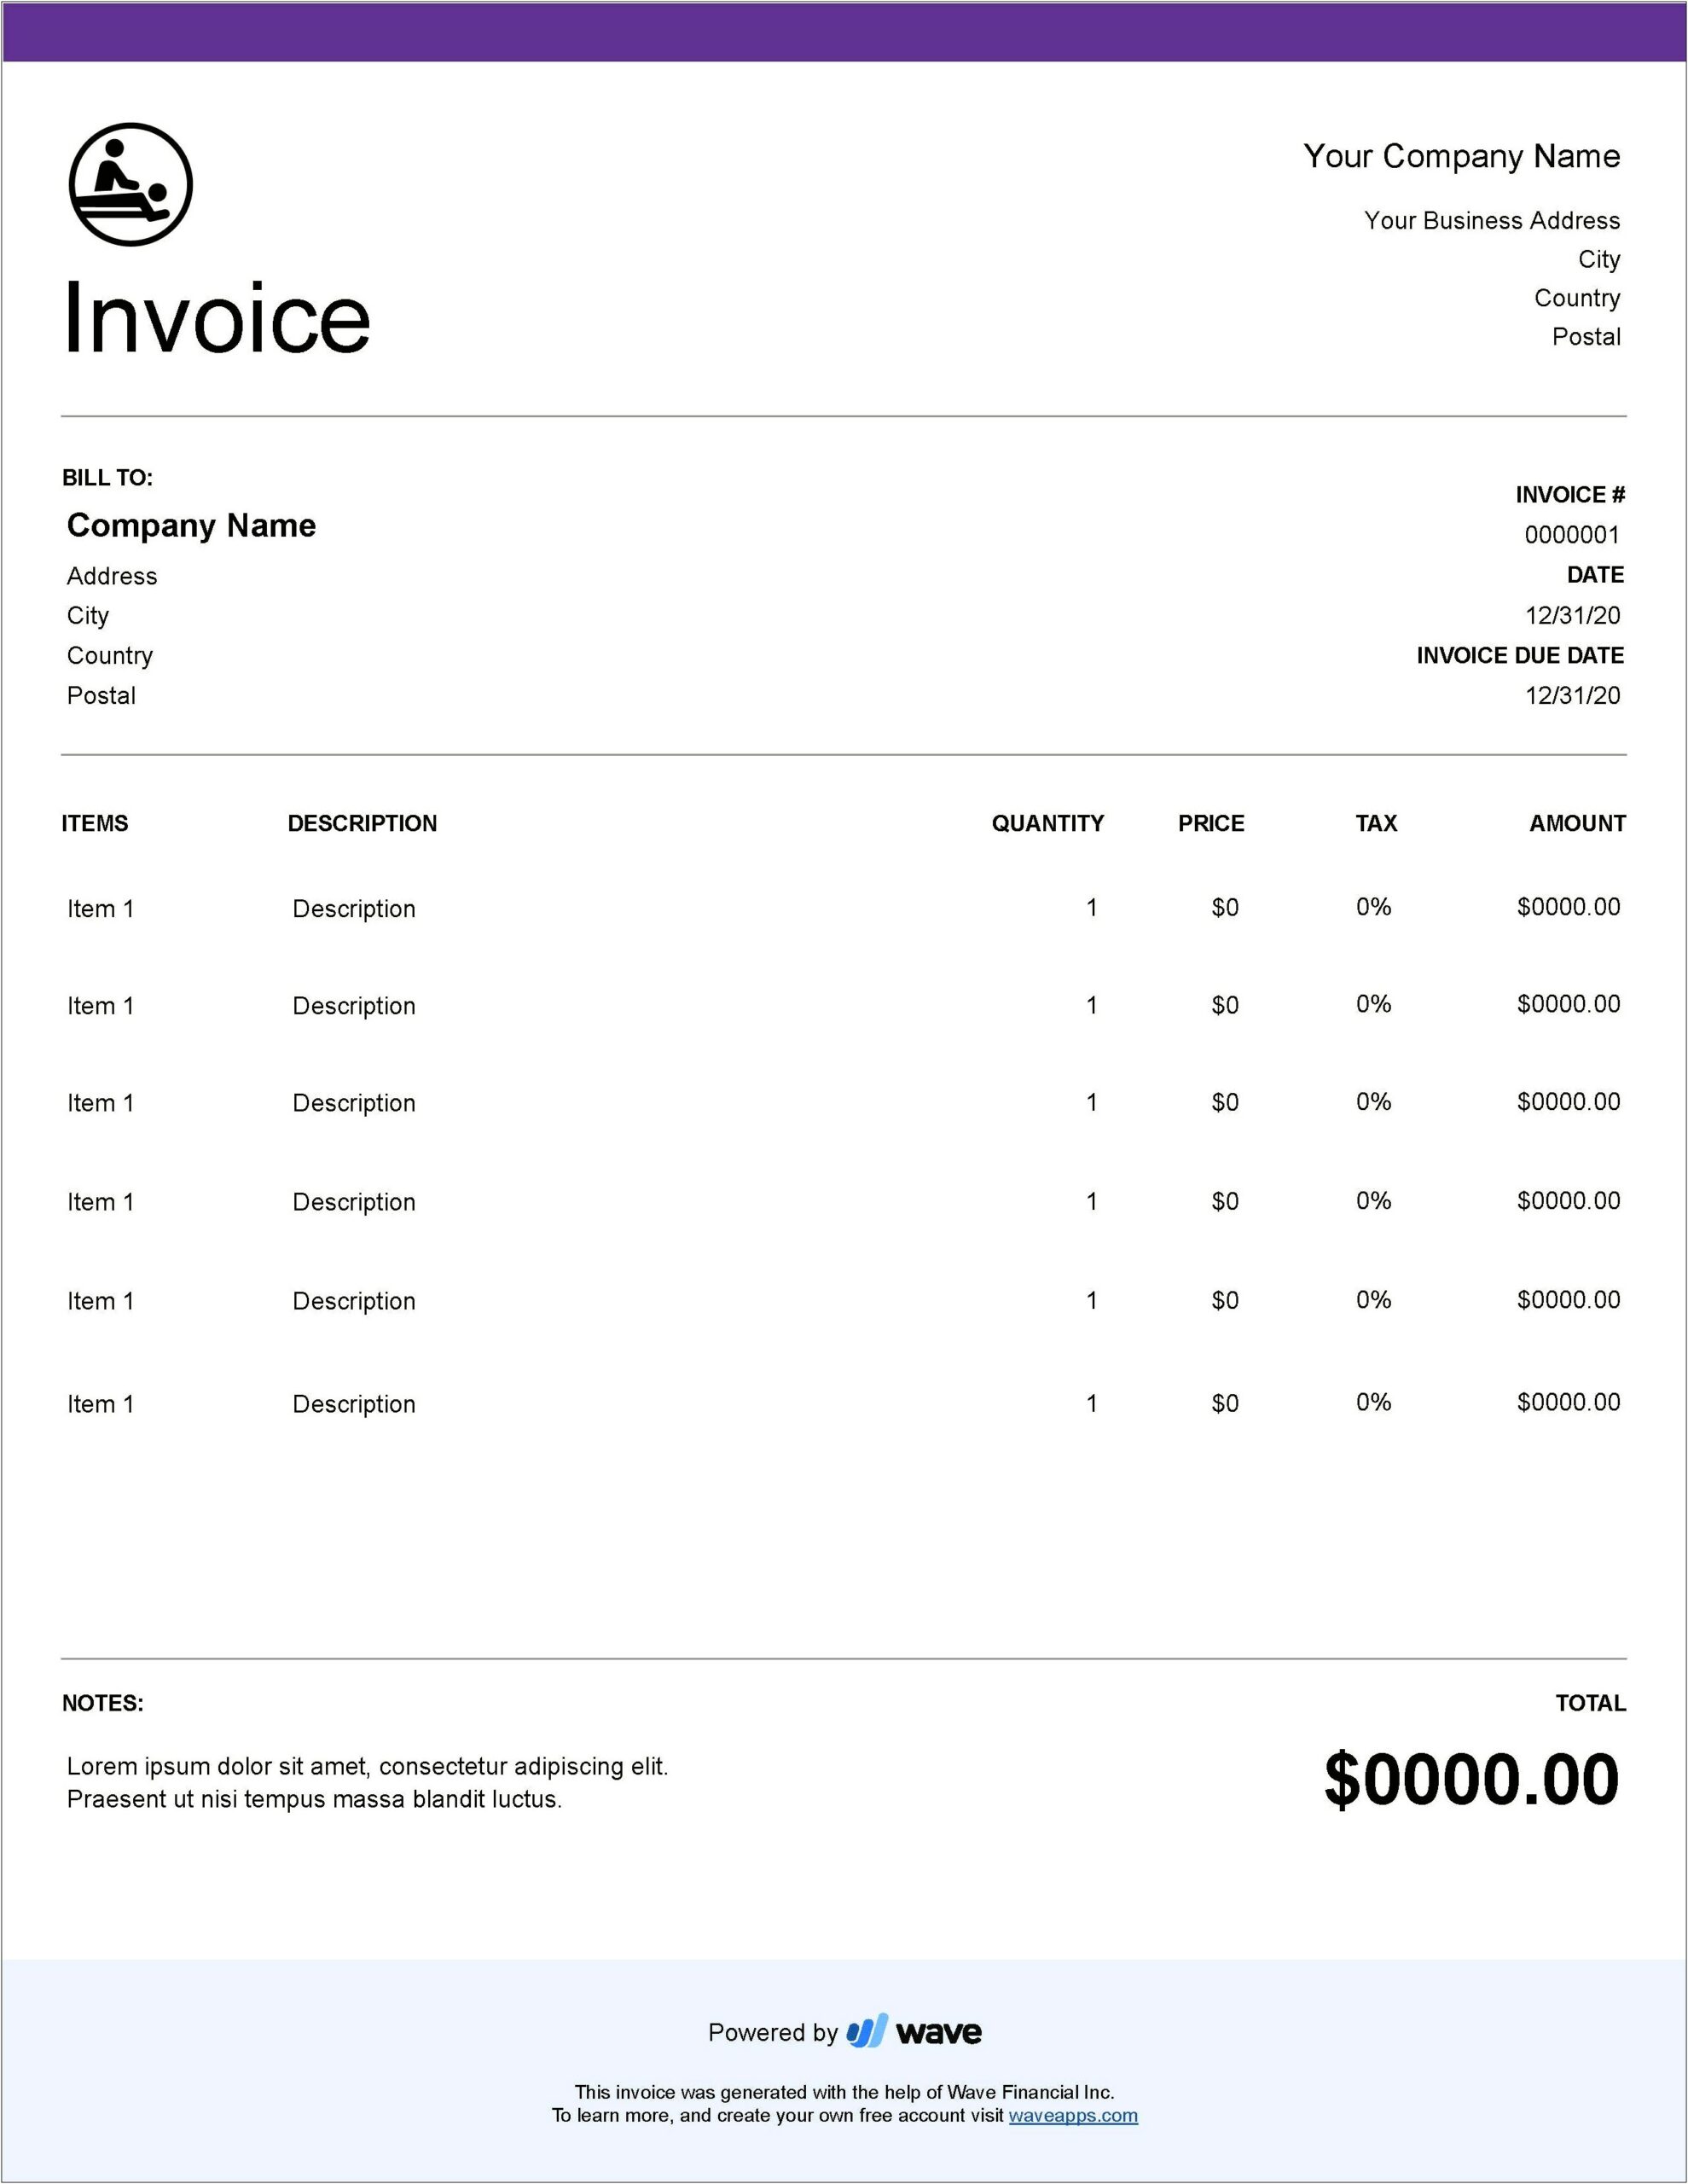 Can I Download Invoice Template Excel To Qb